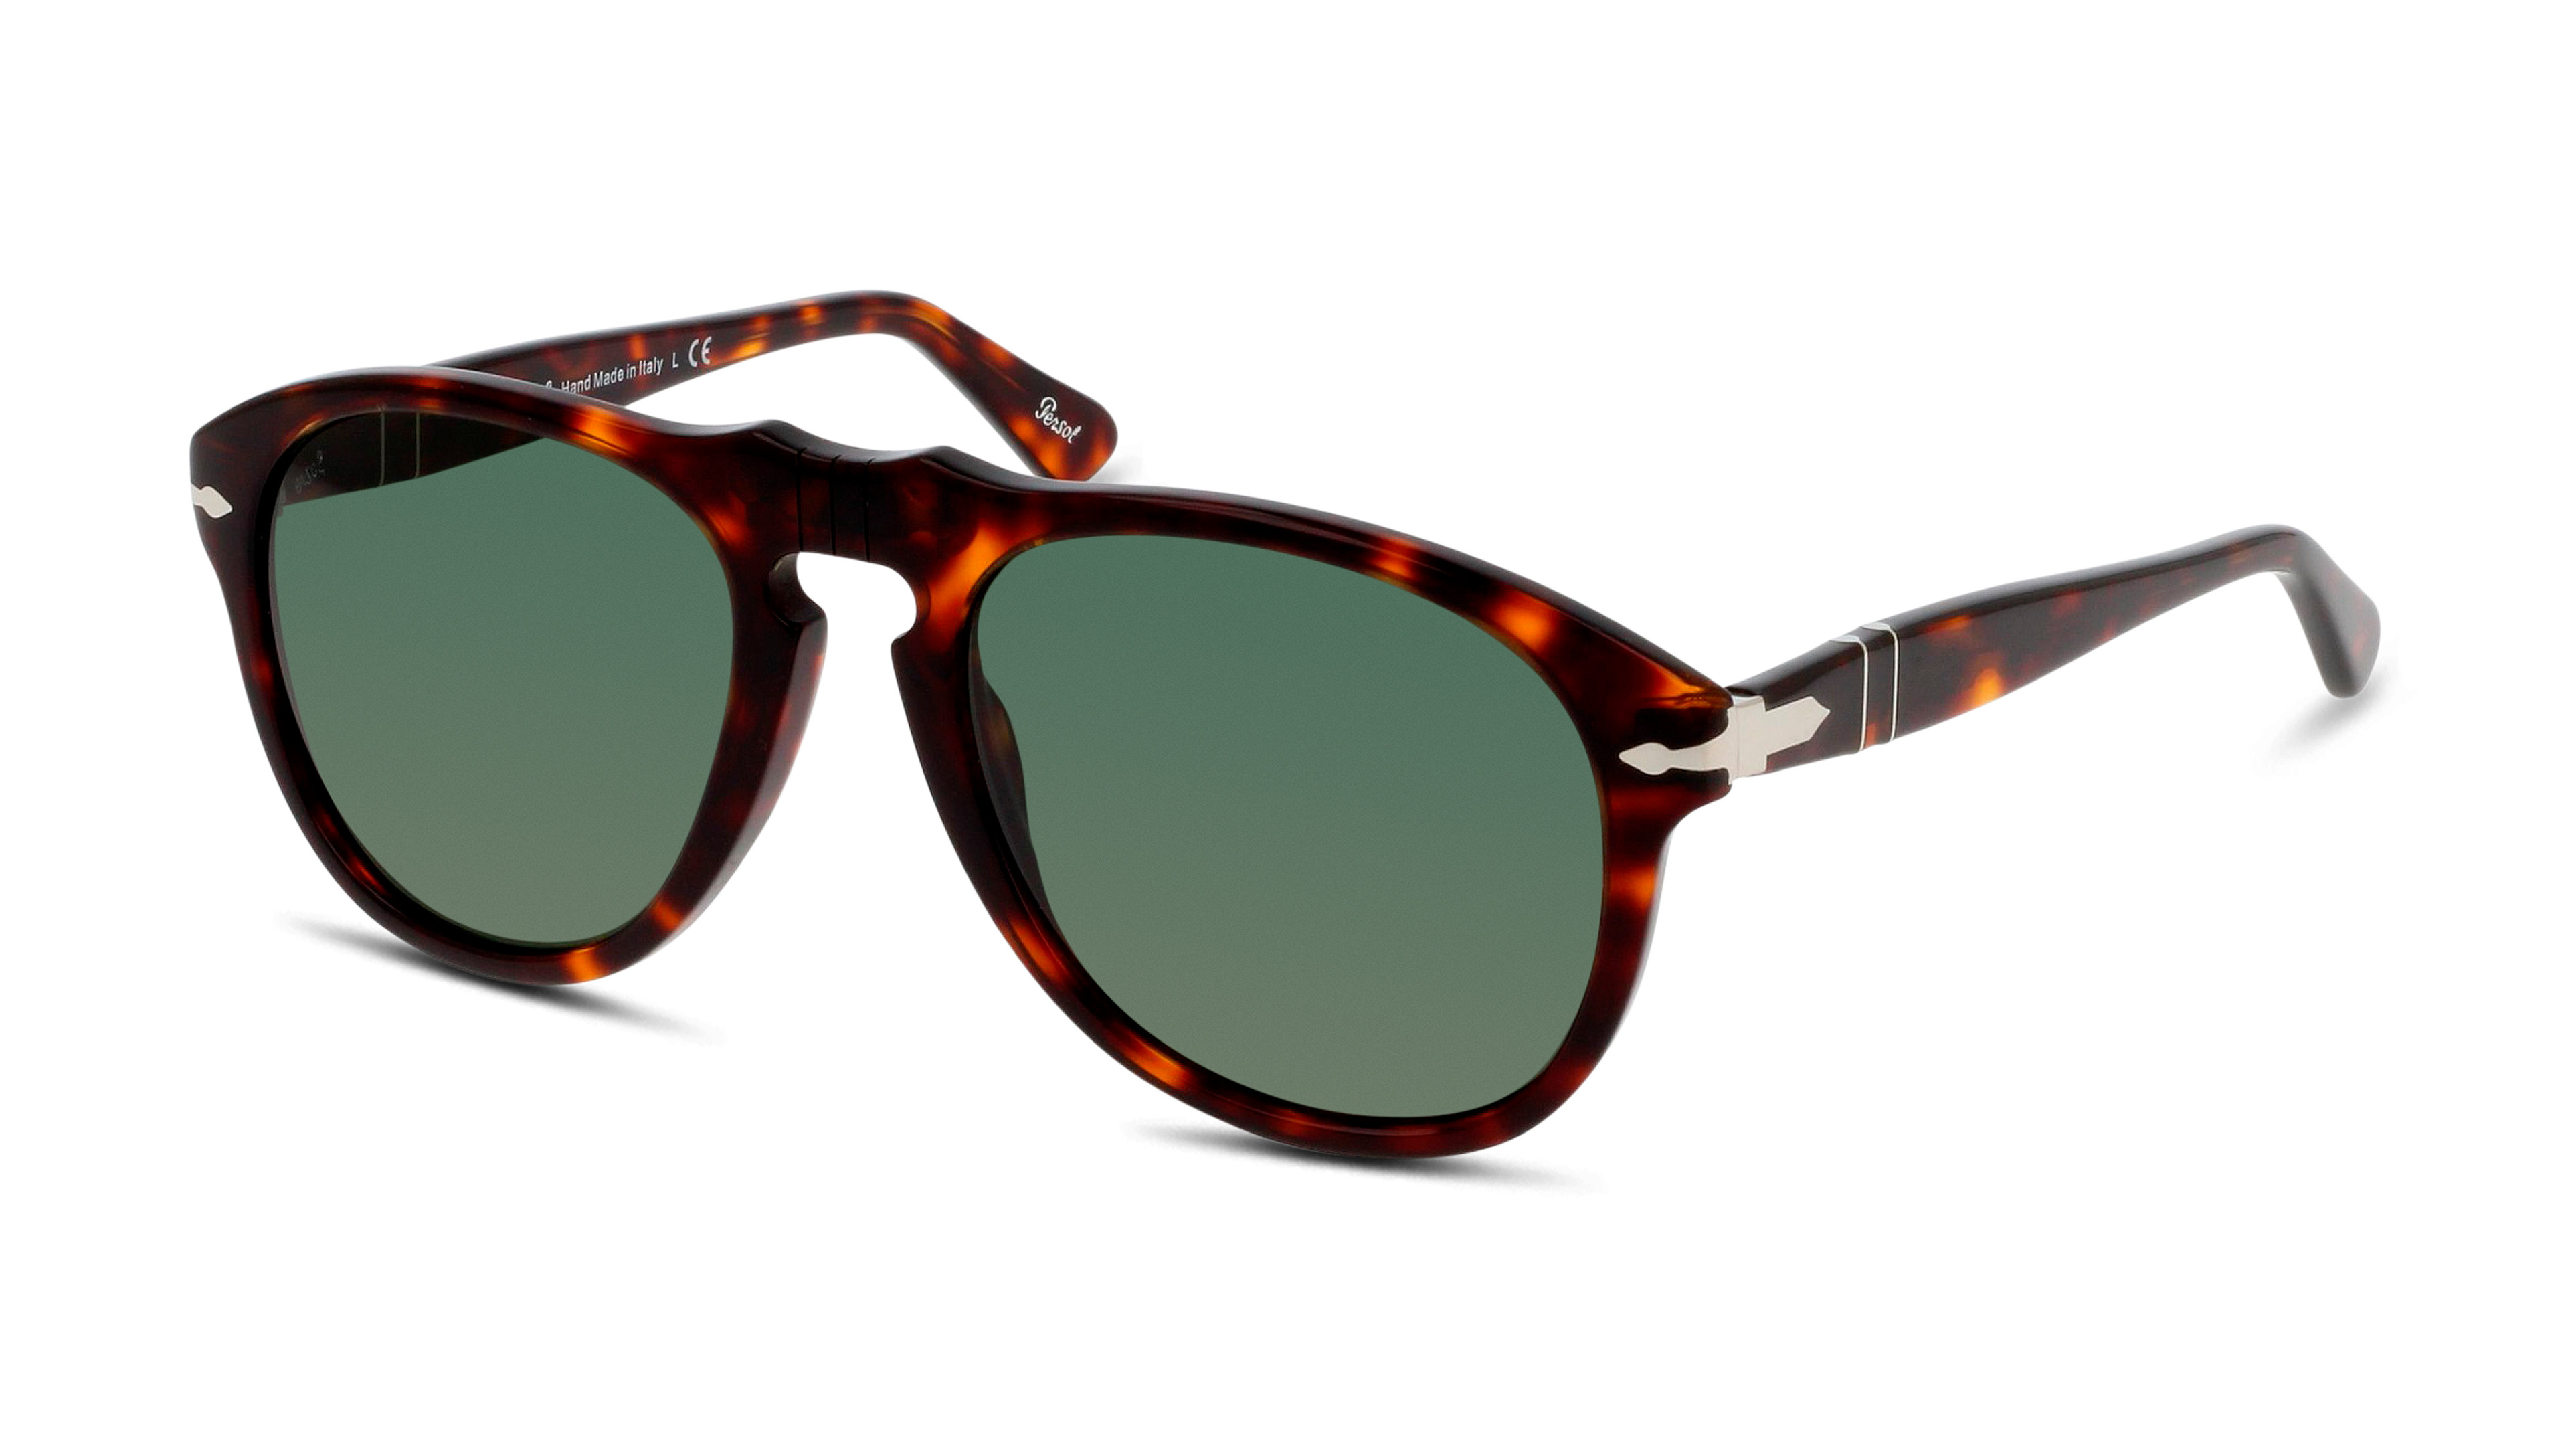 [products.image.angle_left01] Persol 0PO0649 24/31 Sonnenbrille